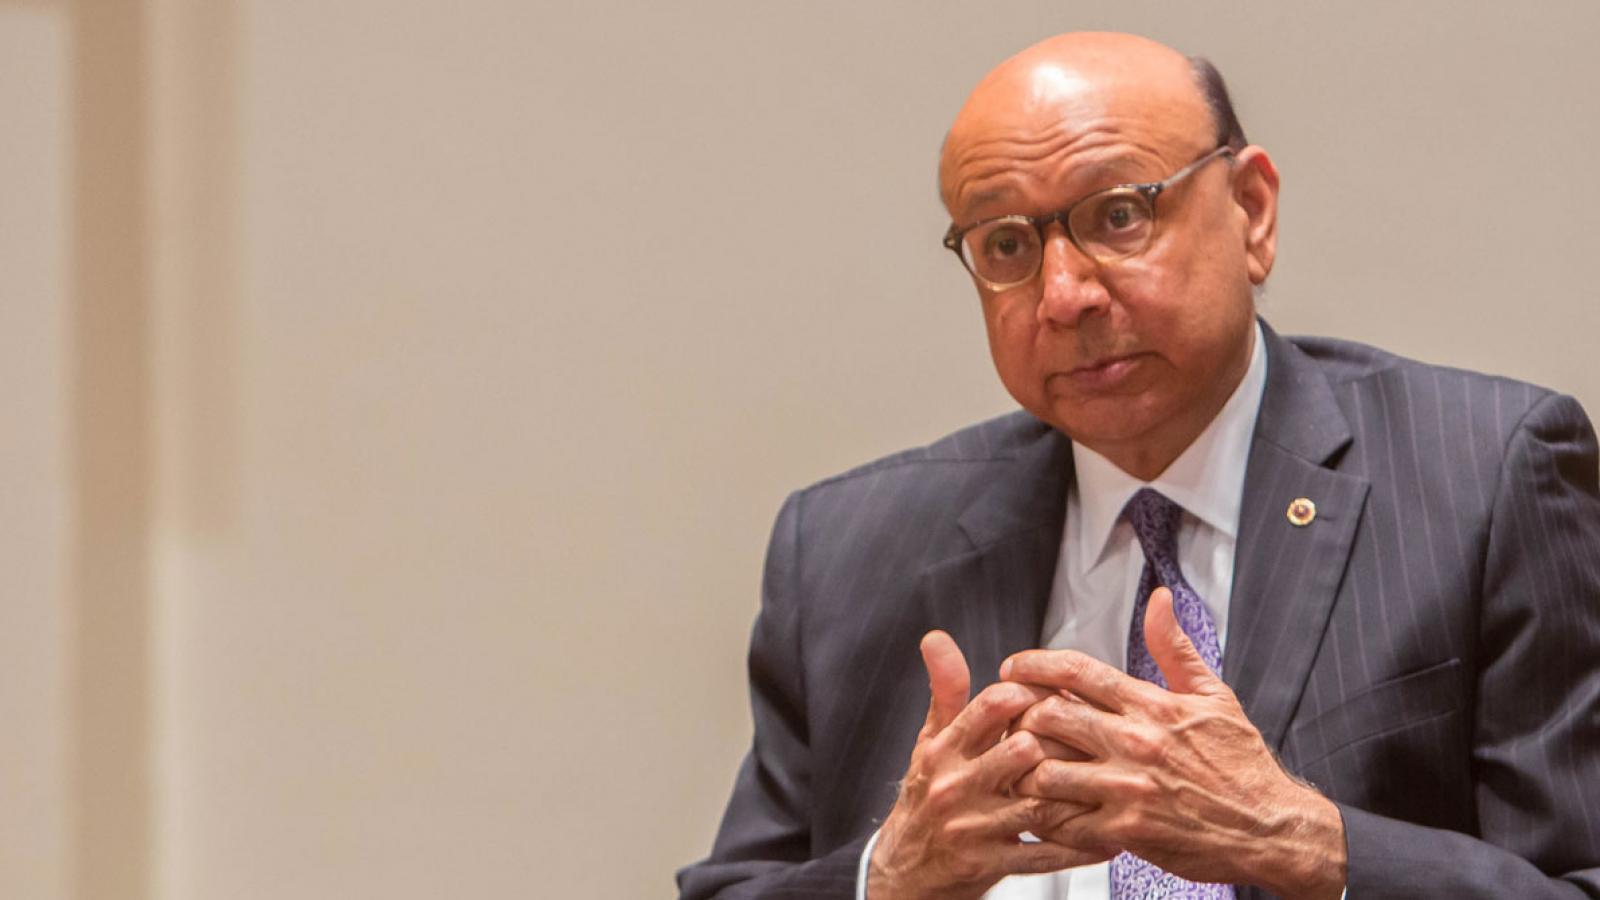 Khizr Khan takes questions from the American Forum studio audience